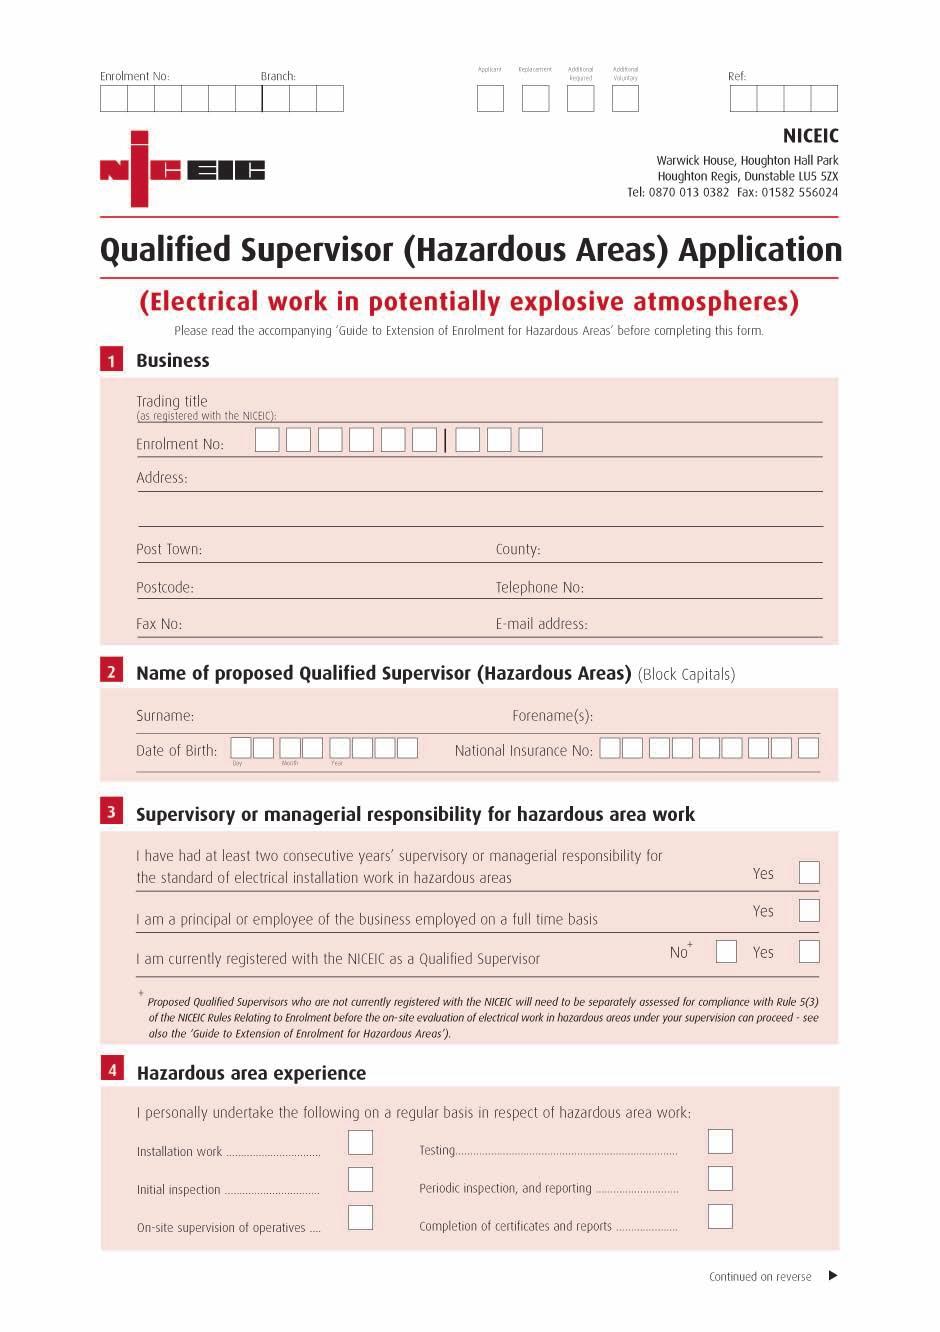 Completing the Qualified Supervisor (Hazardous Areas) application form A separate application form is required for each proposed Qualified Supervisor (Hazardous Areas).